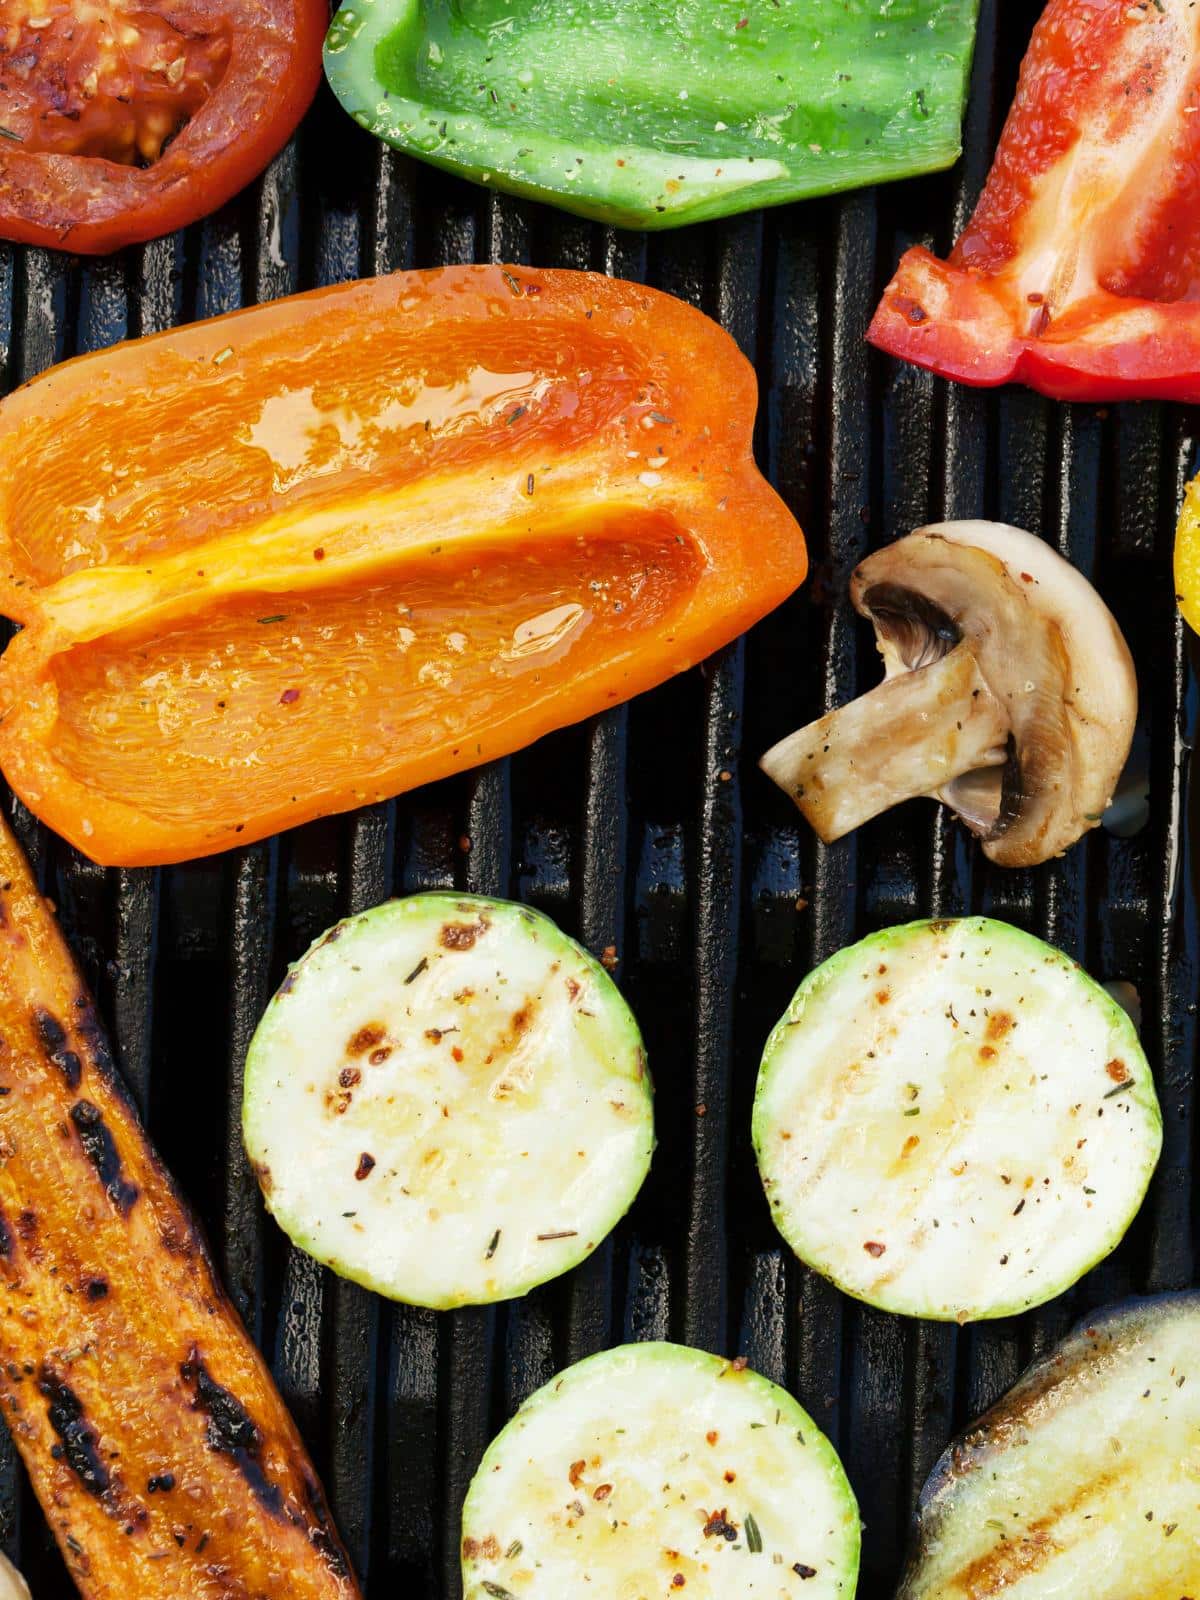 Bell peppers, zucchini and mushrooms grilling on a grill.